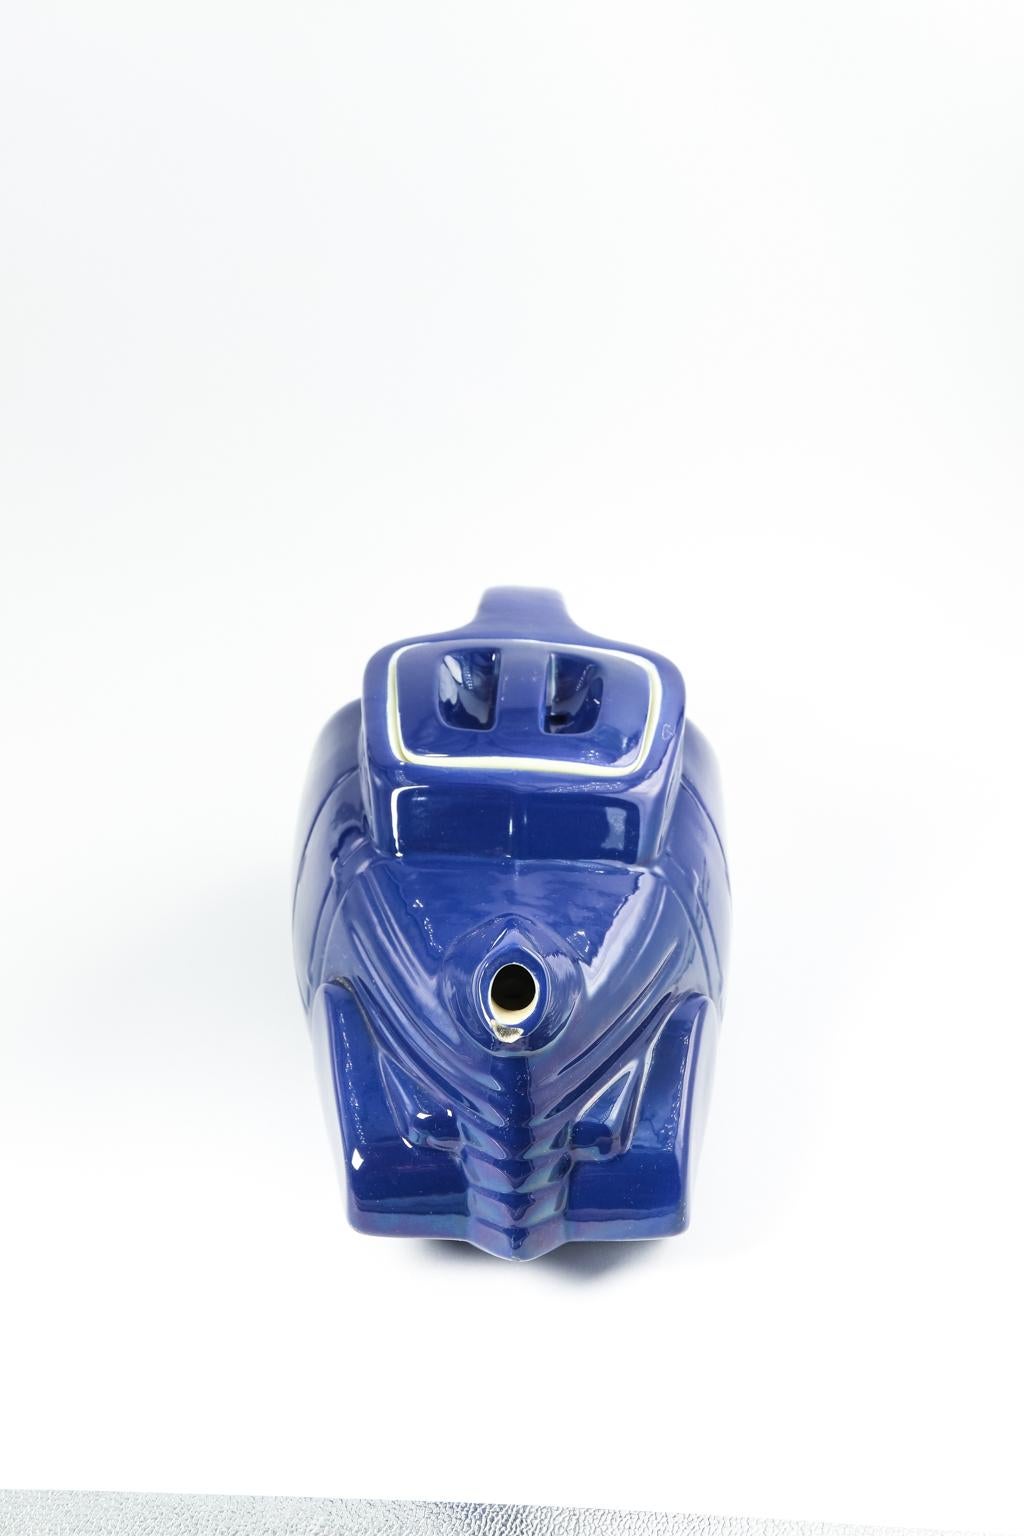 Mid-20th Century Automobile Teapot in Royal Blue by Hall, circa 1930s For Sale